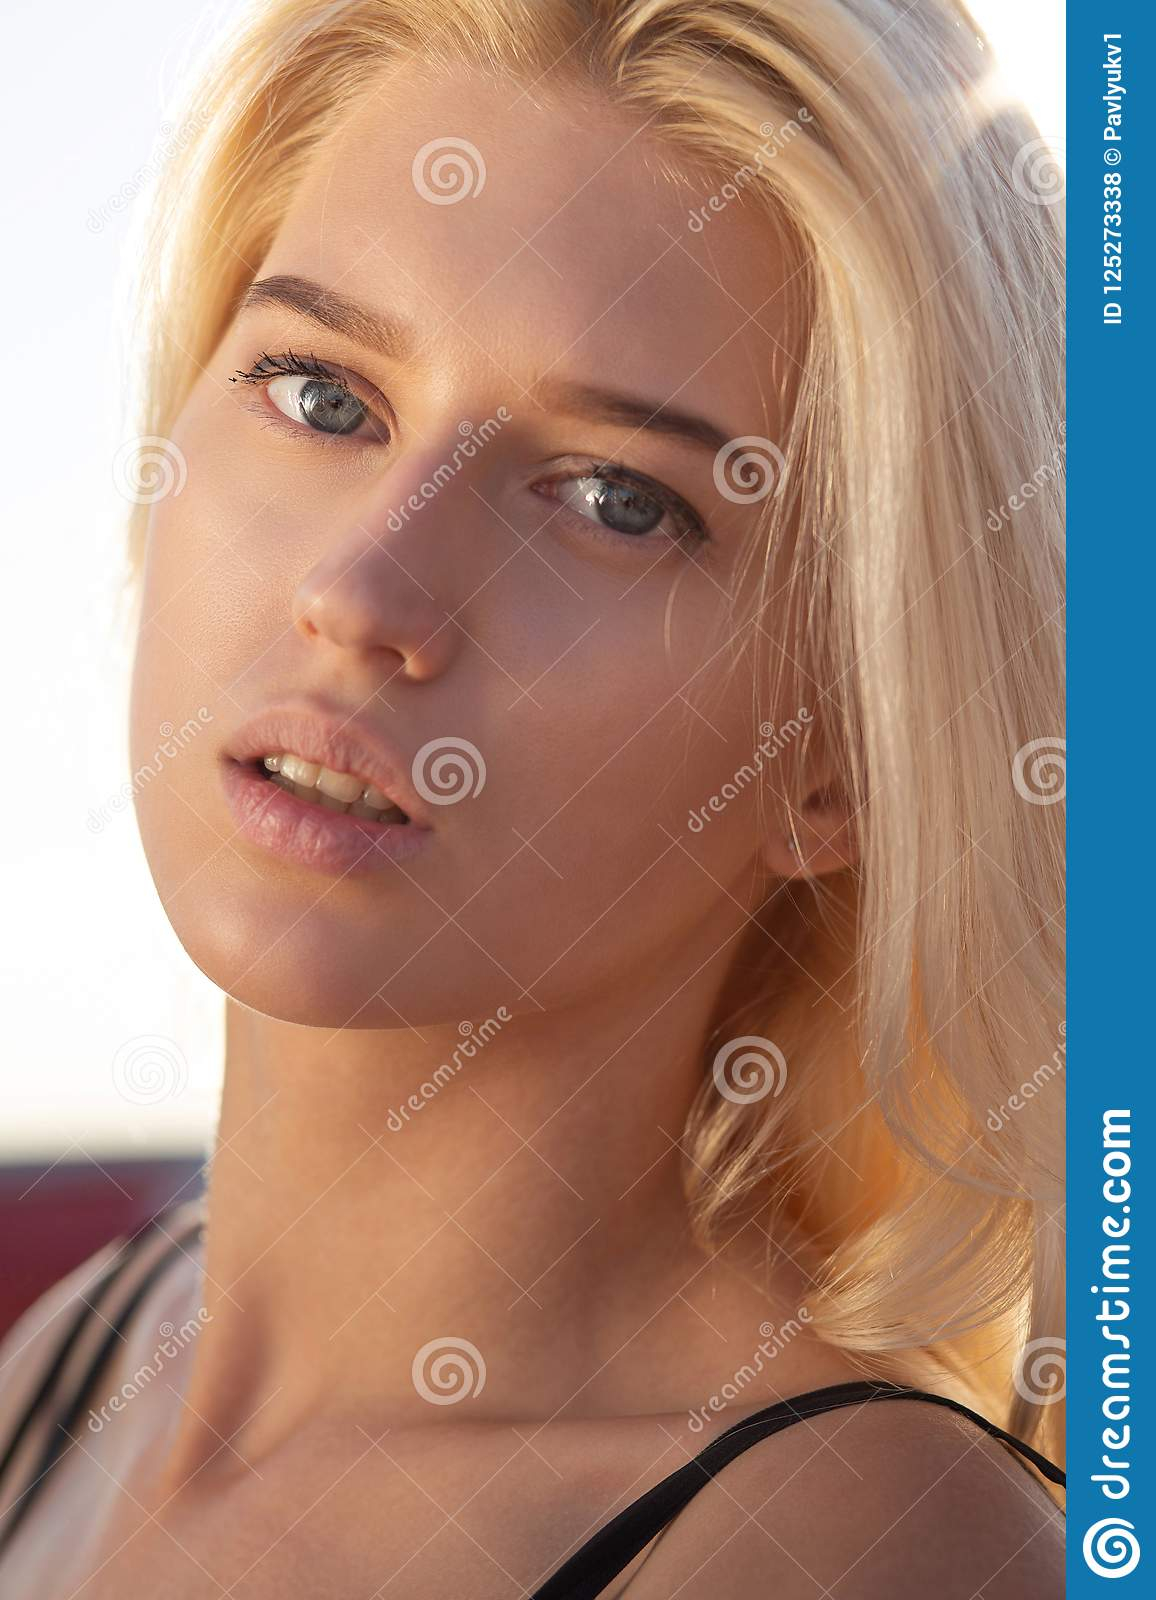 Makeup For Blondes With Blue Eyes Gorgeous Blonde Blue Eyed Model With Natural Makeup And Hair Lo